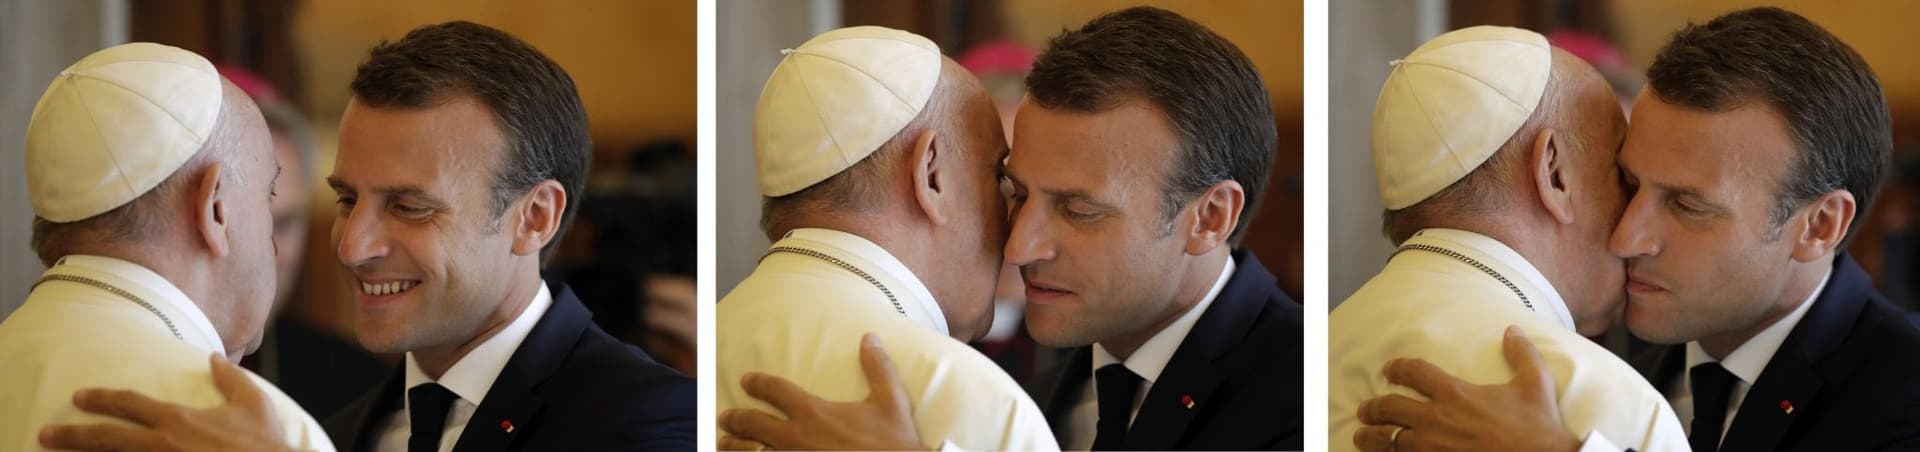 Pope Francis speaks with French president about post-COVID world